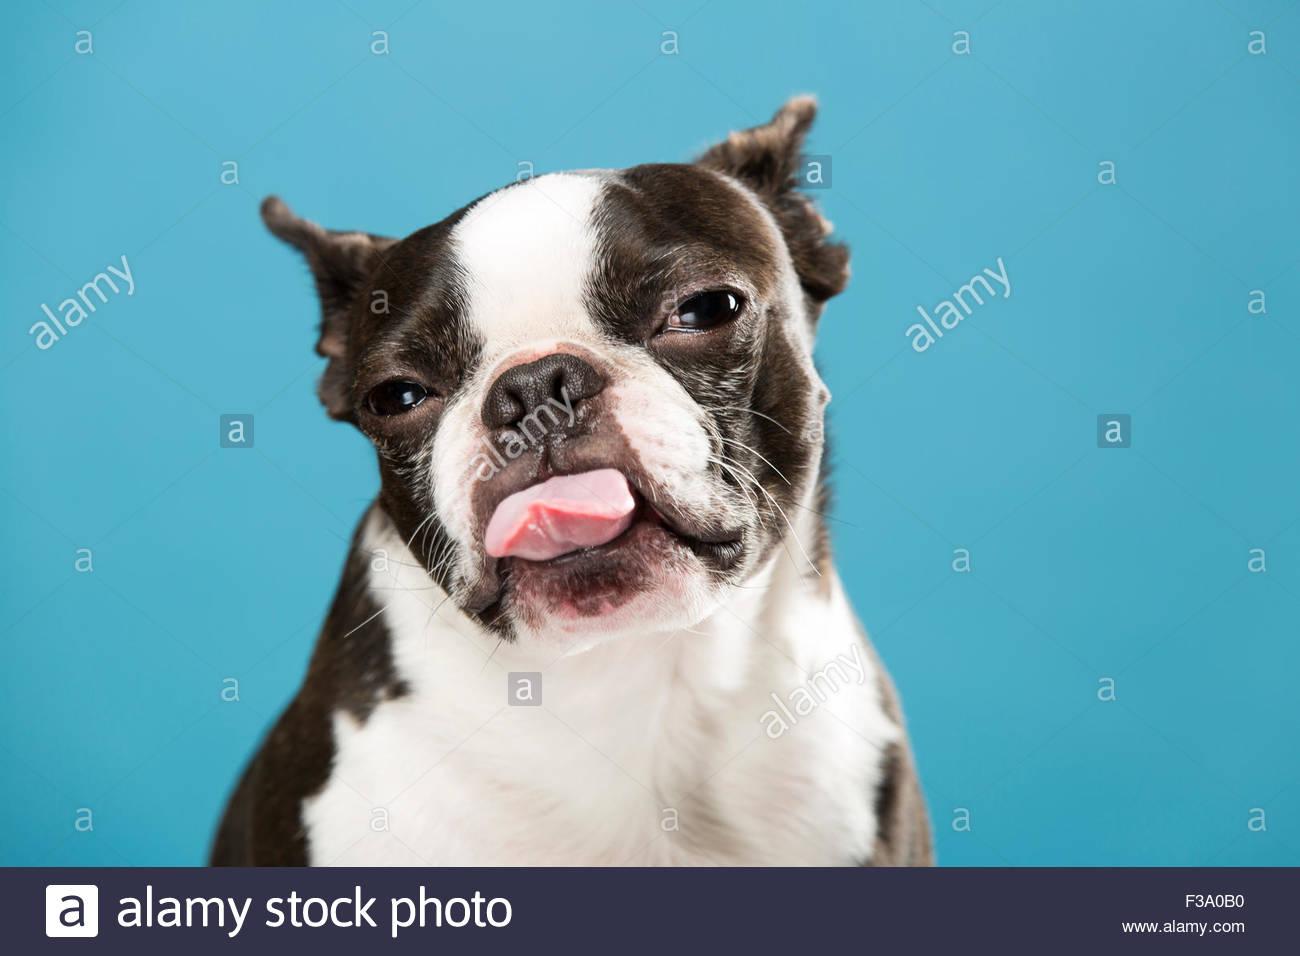 Boston Terrier Puppy With Tongue Out